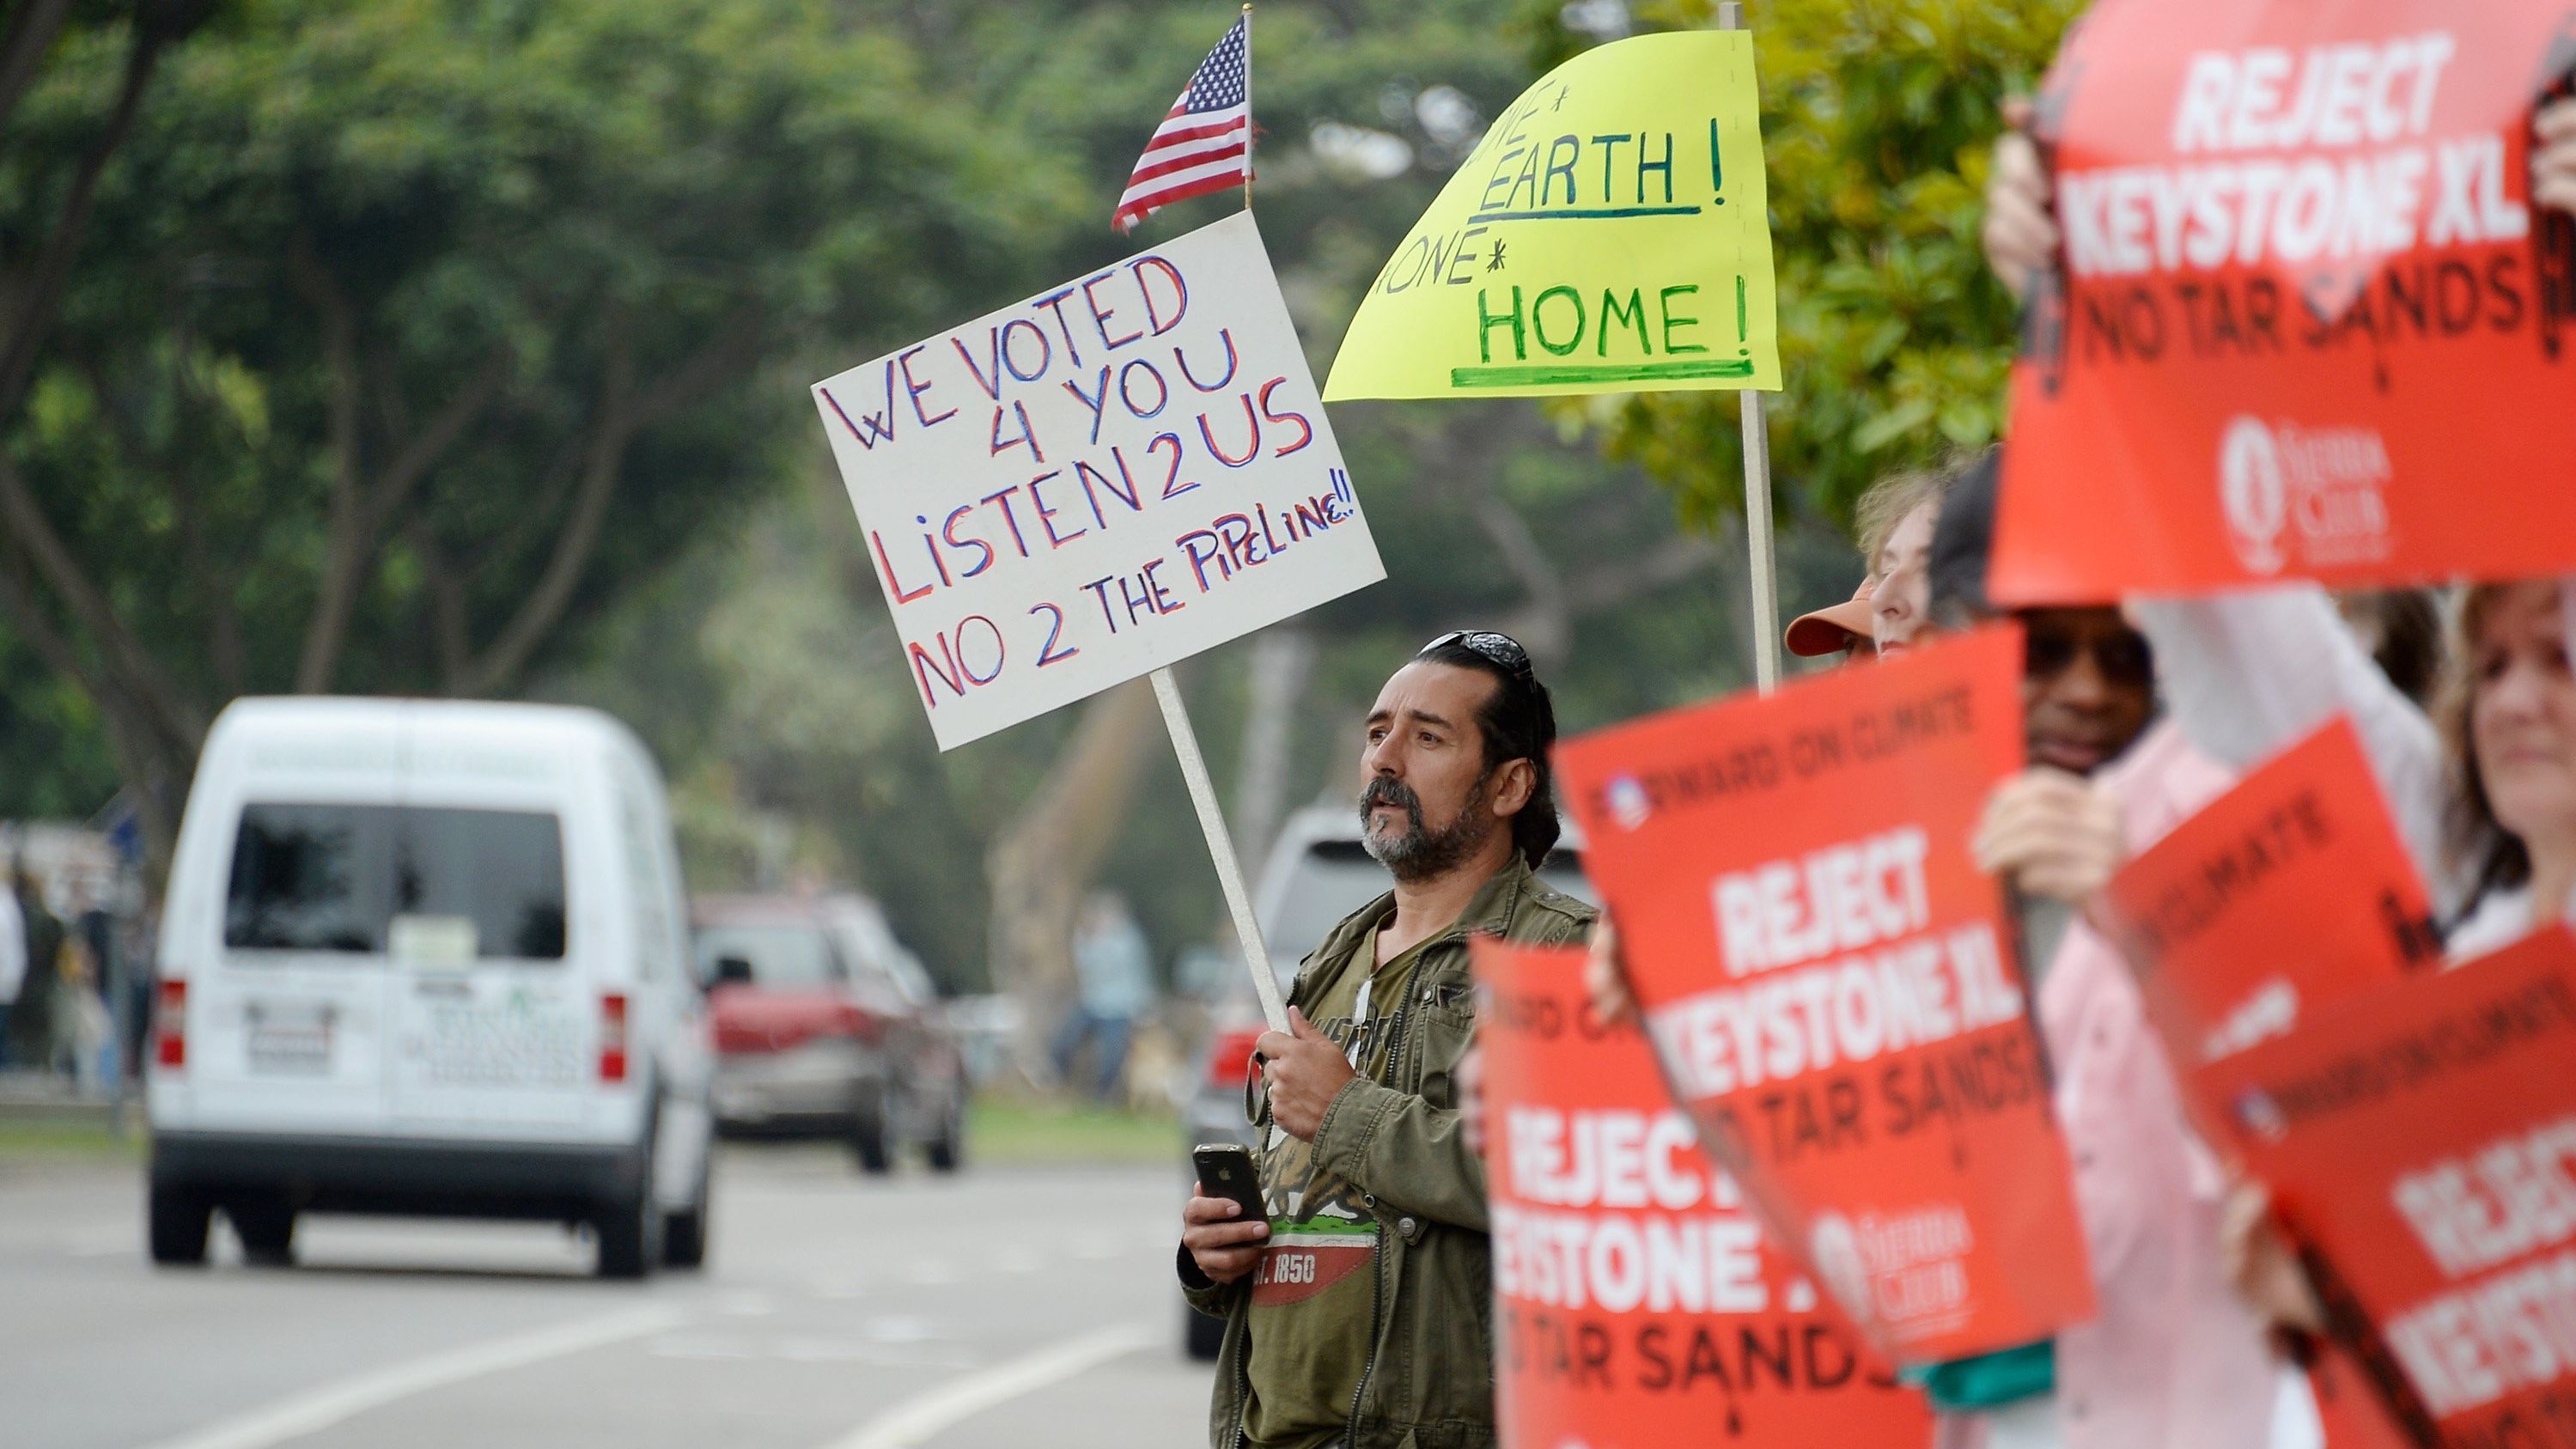 Protesters send a message to the president over the Keystone XL pipeline at a Santa Monica, California, fund-raiser this month.